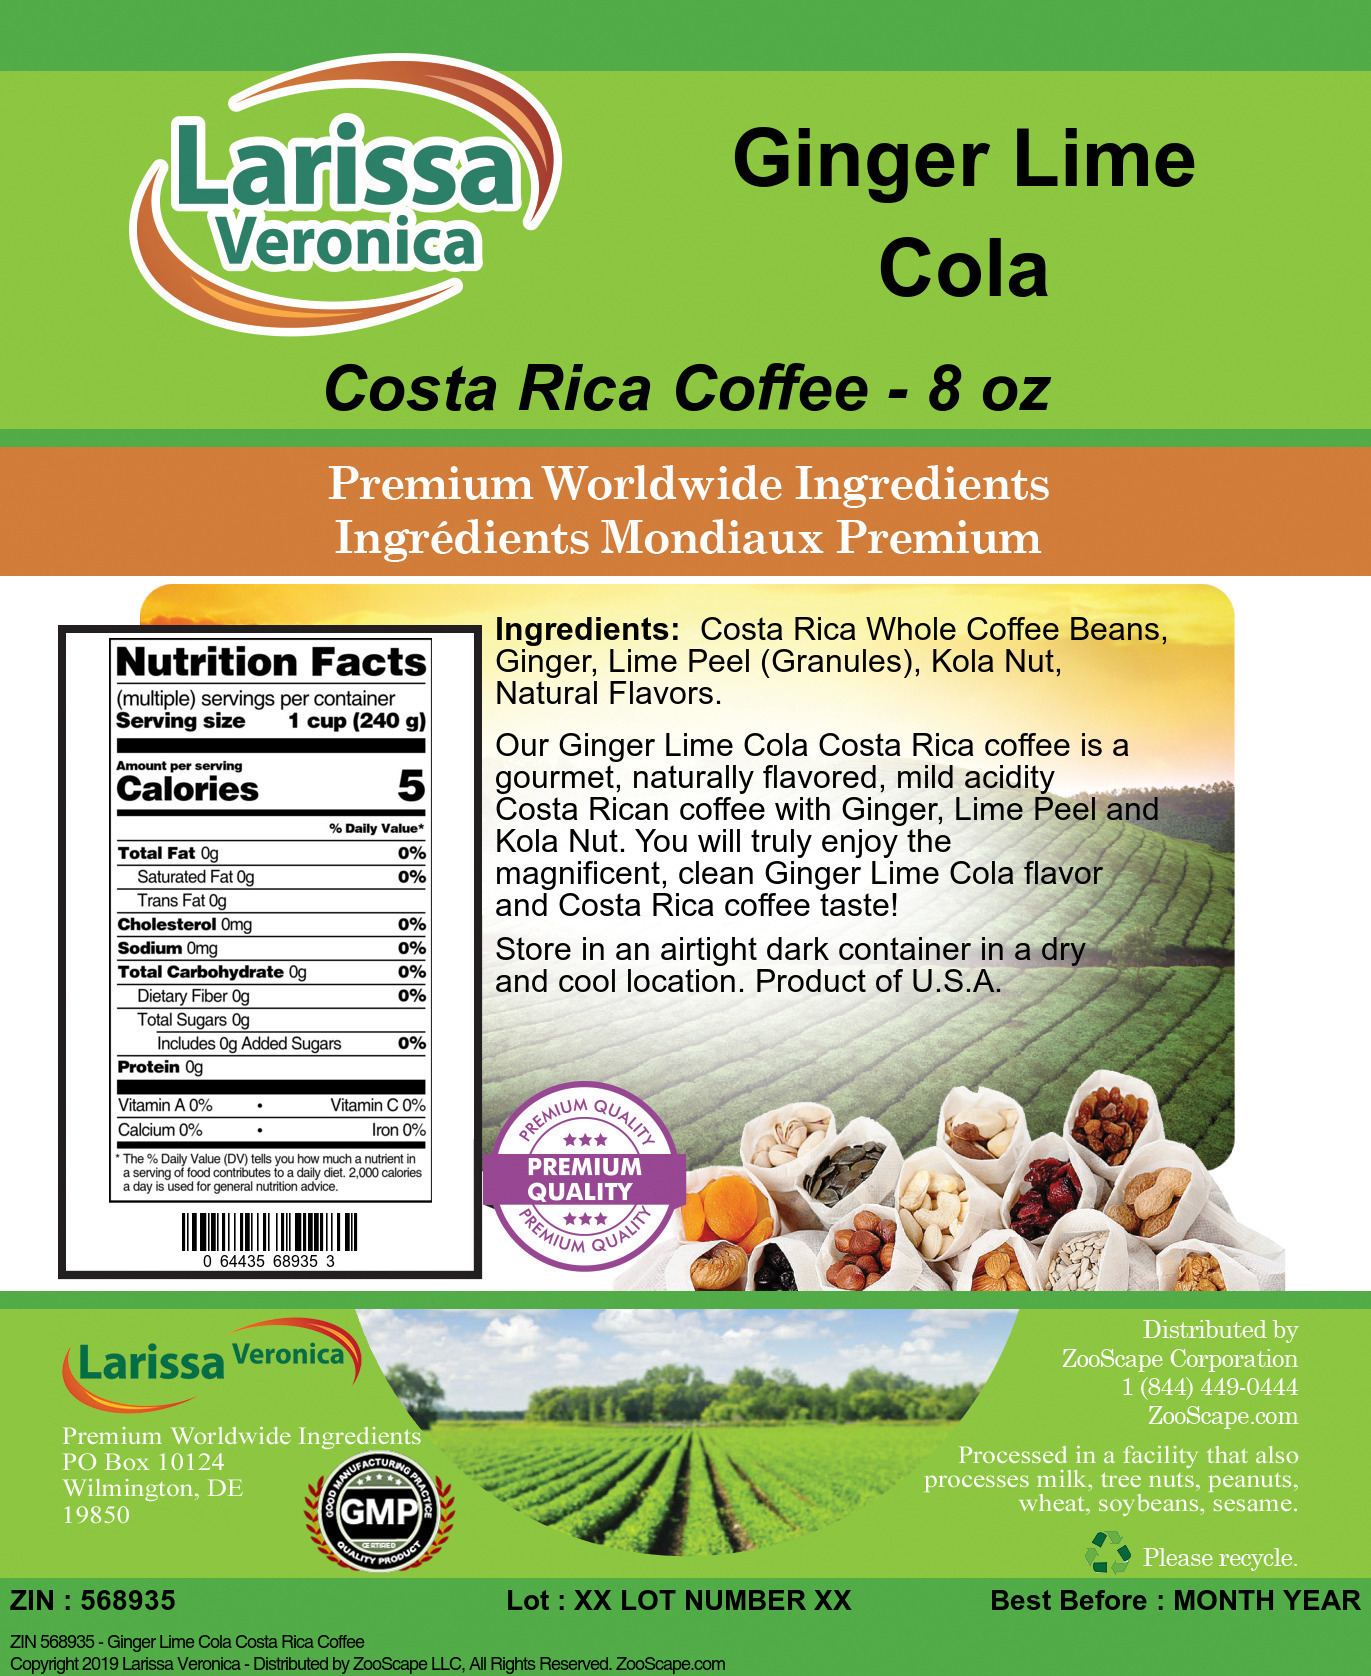 Ginger Lime Cola Costa Rica Coffee - Label